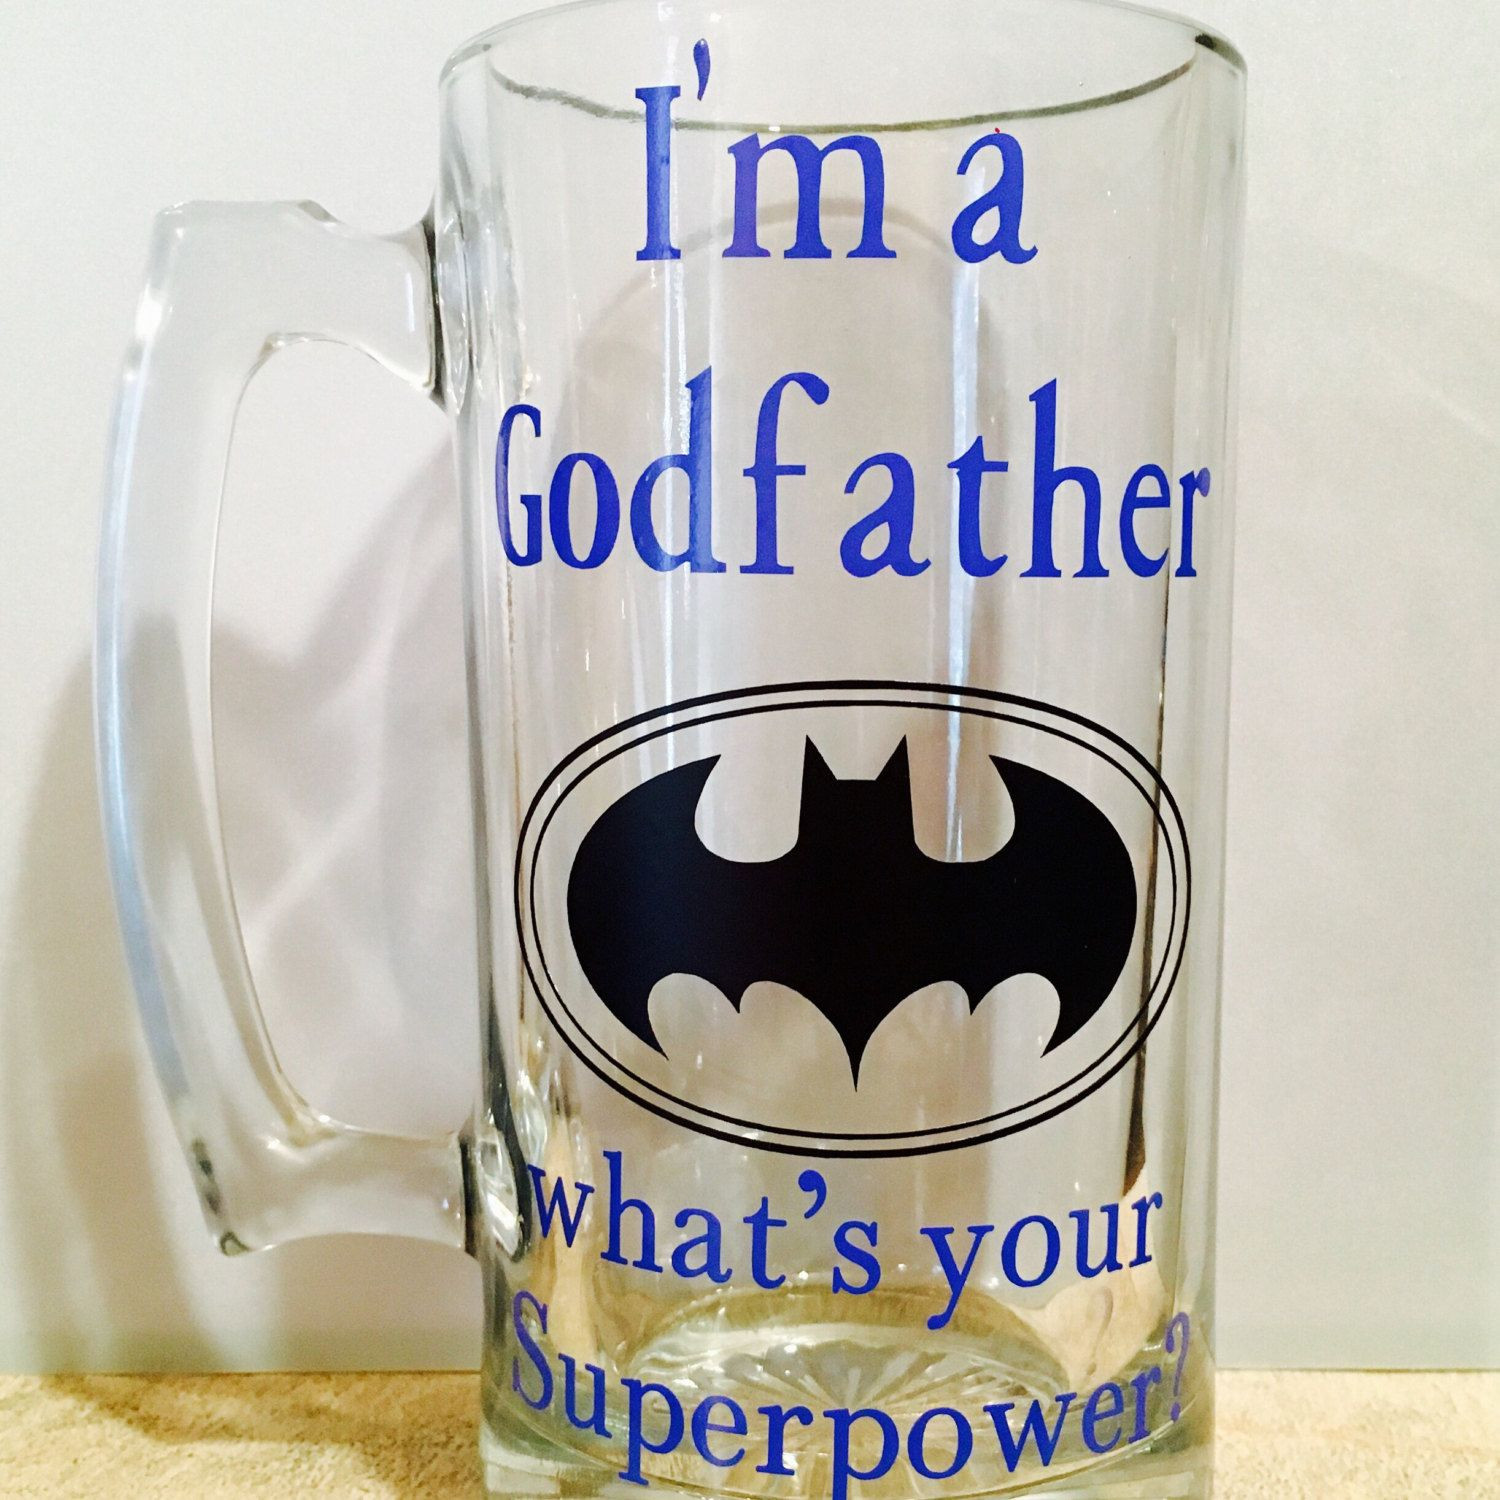 Godfather Gift Ideas
 I m a godfather what s your superpower godfather beer mug